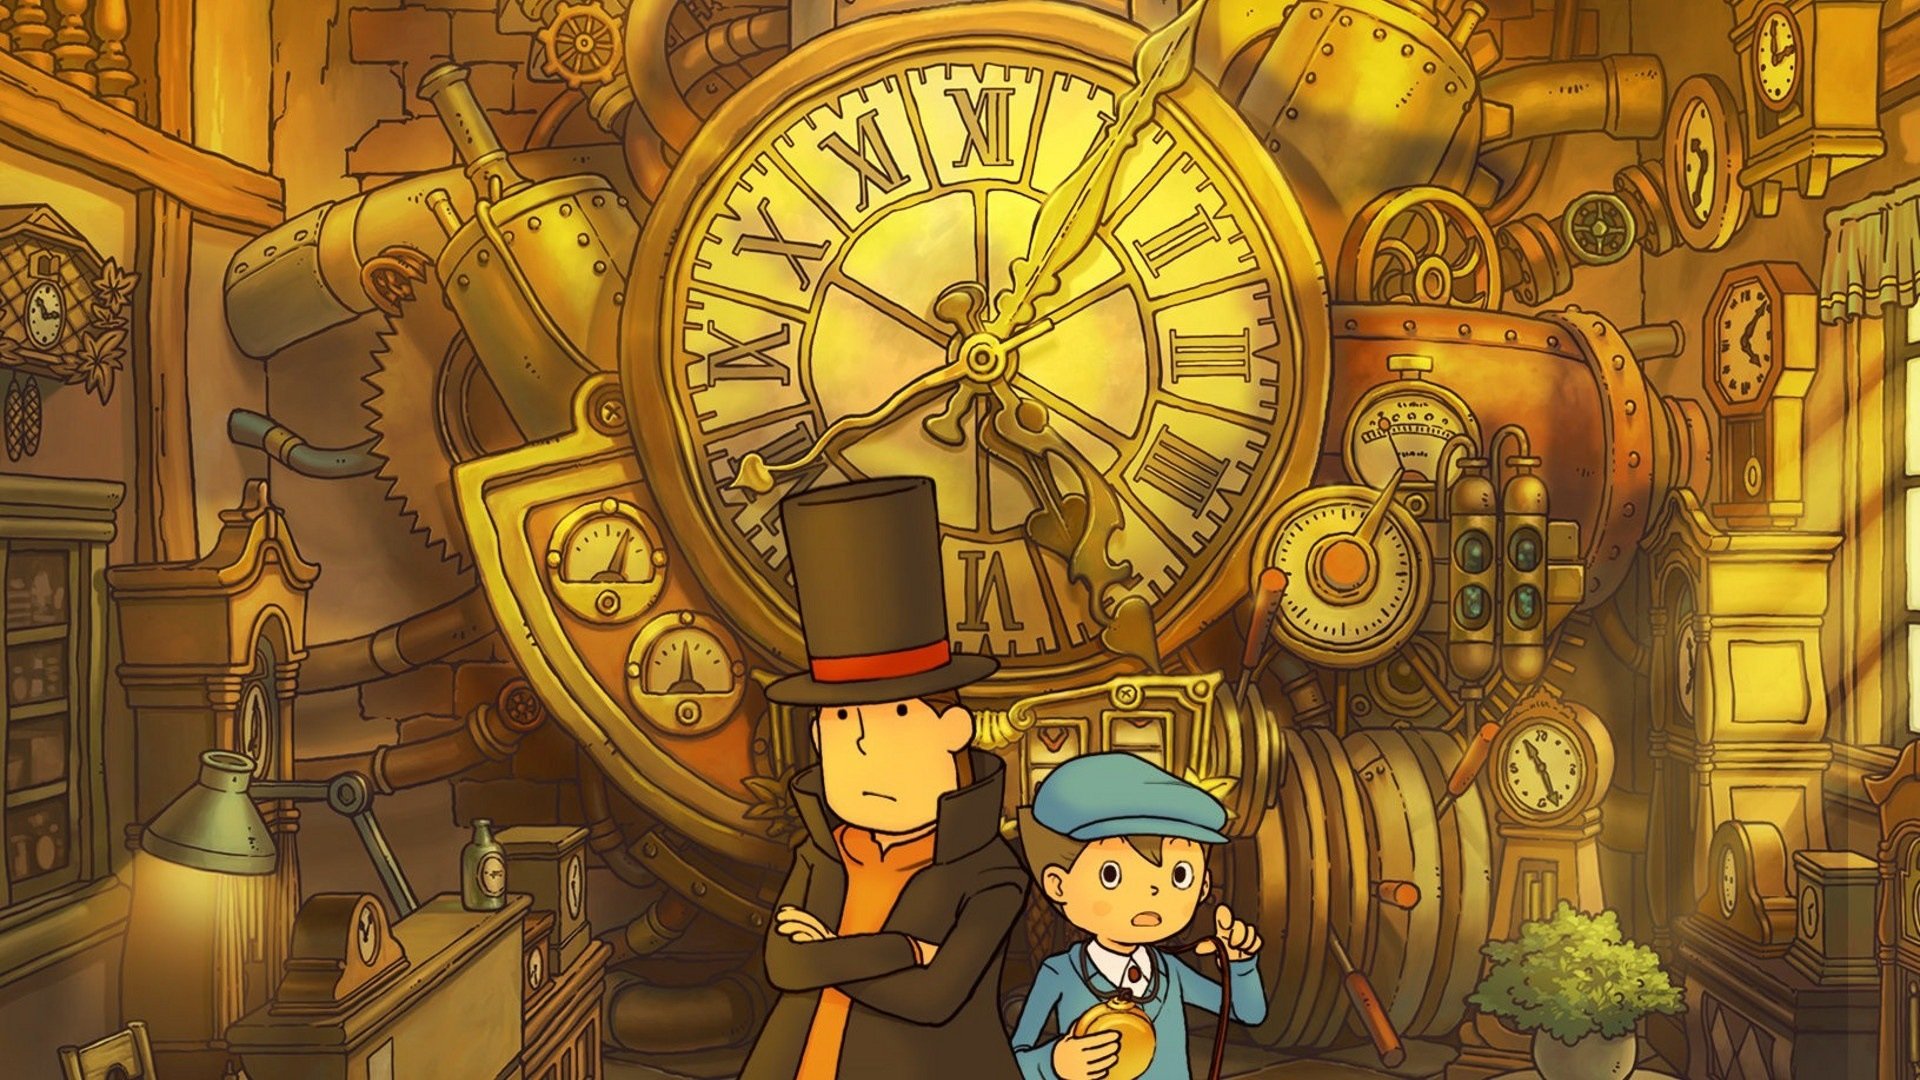 Promotional art for "Professor Layton and the Unwound Future," 2008 (Image from Level-5/Nintendo).